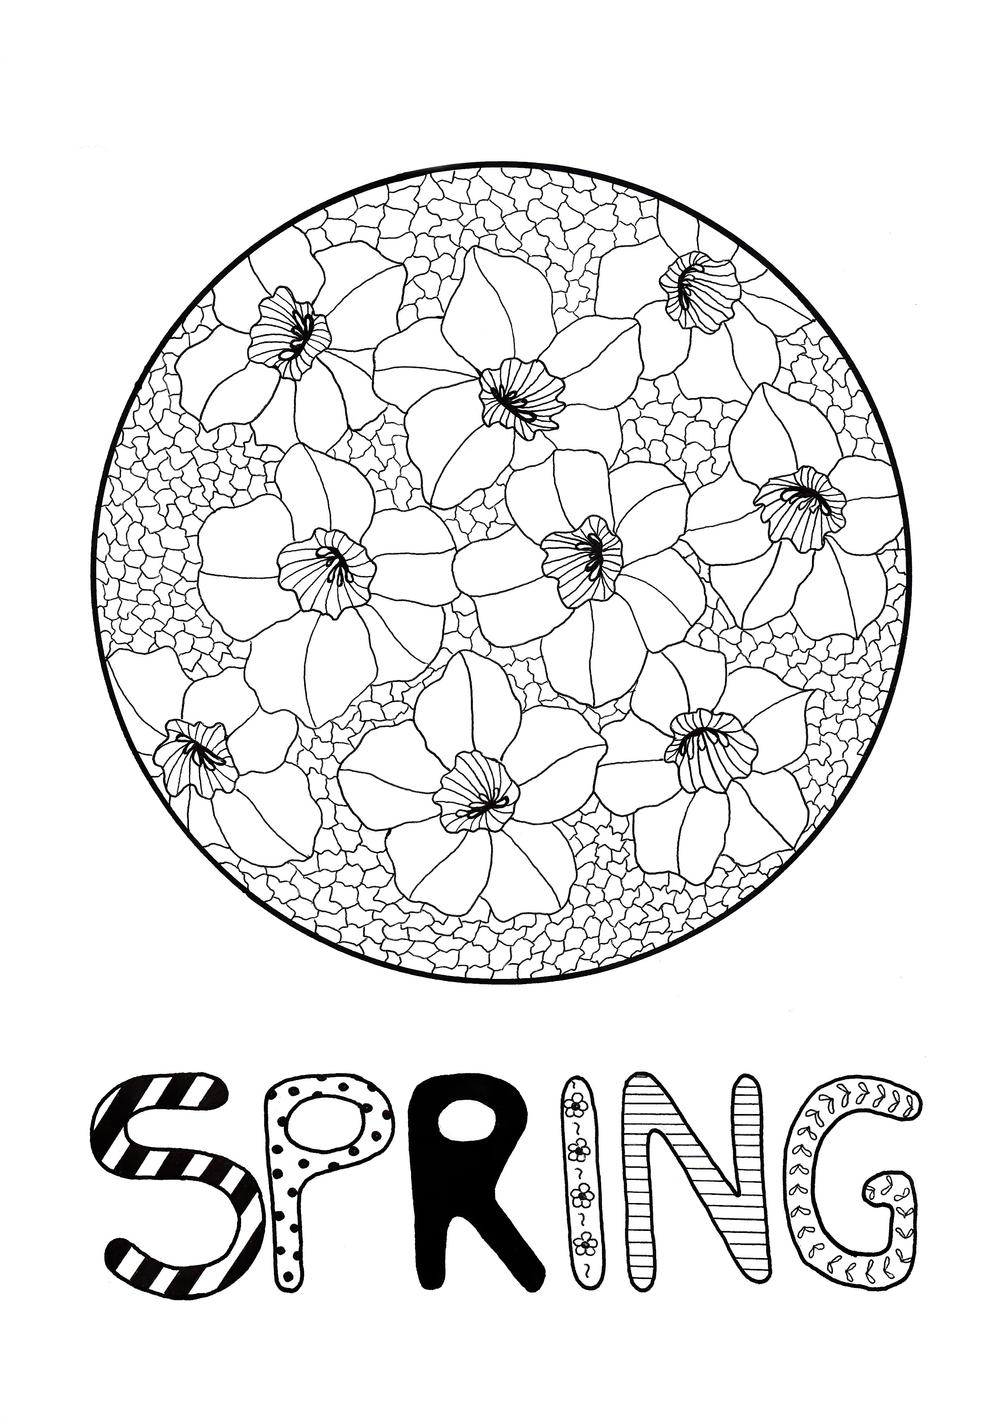 Daffodil Mosaic Adult Coloring Page | AllFreeHolidayCrafts.com